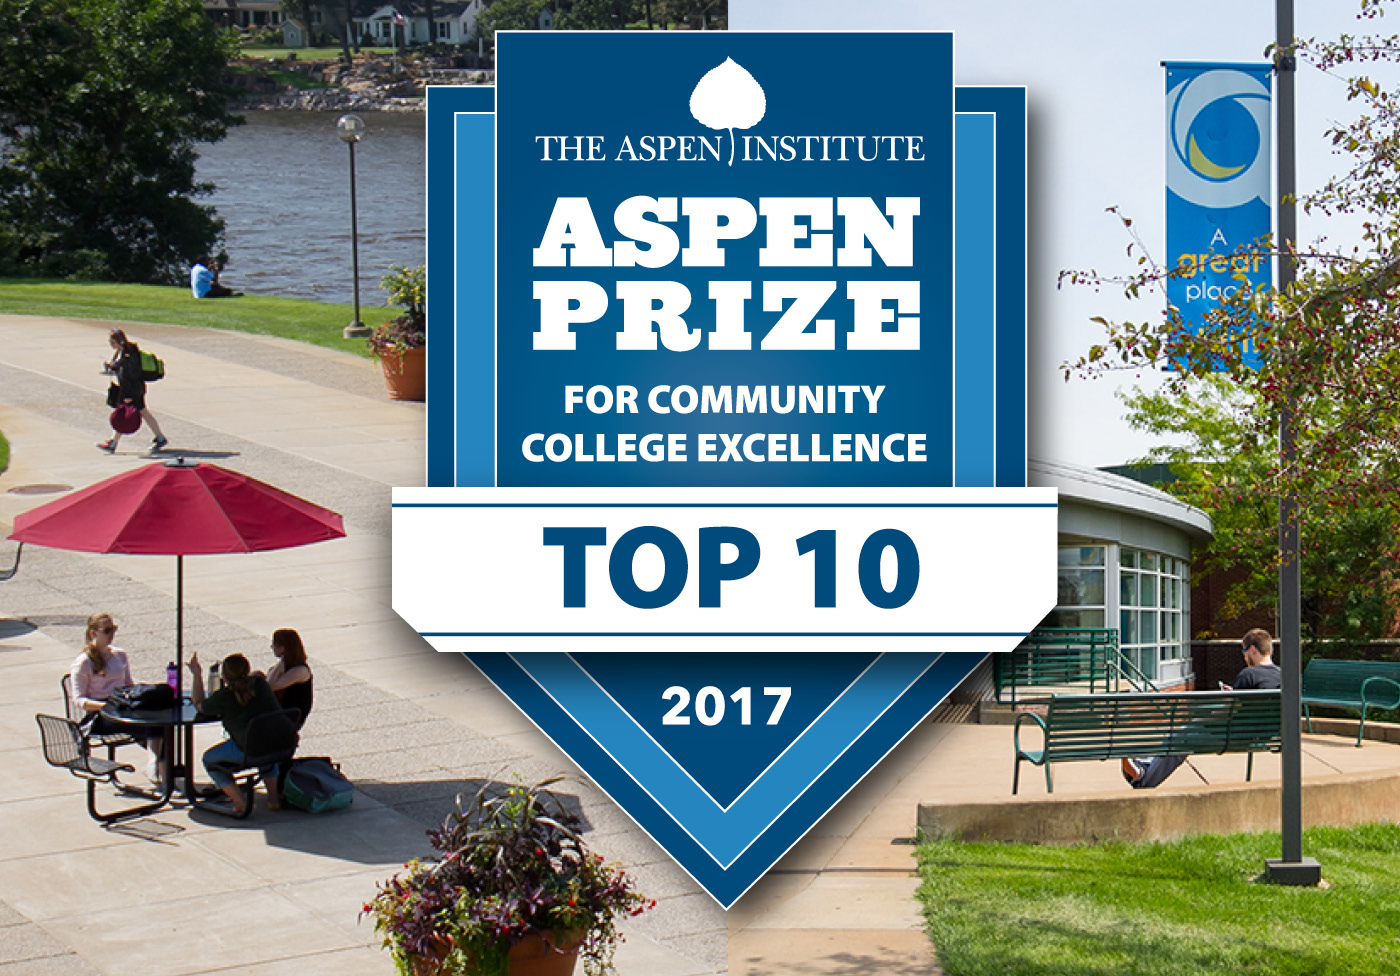 Anoka Ramsey Community College Named One of Top 10 Community Colleges